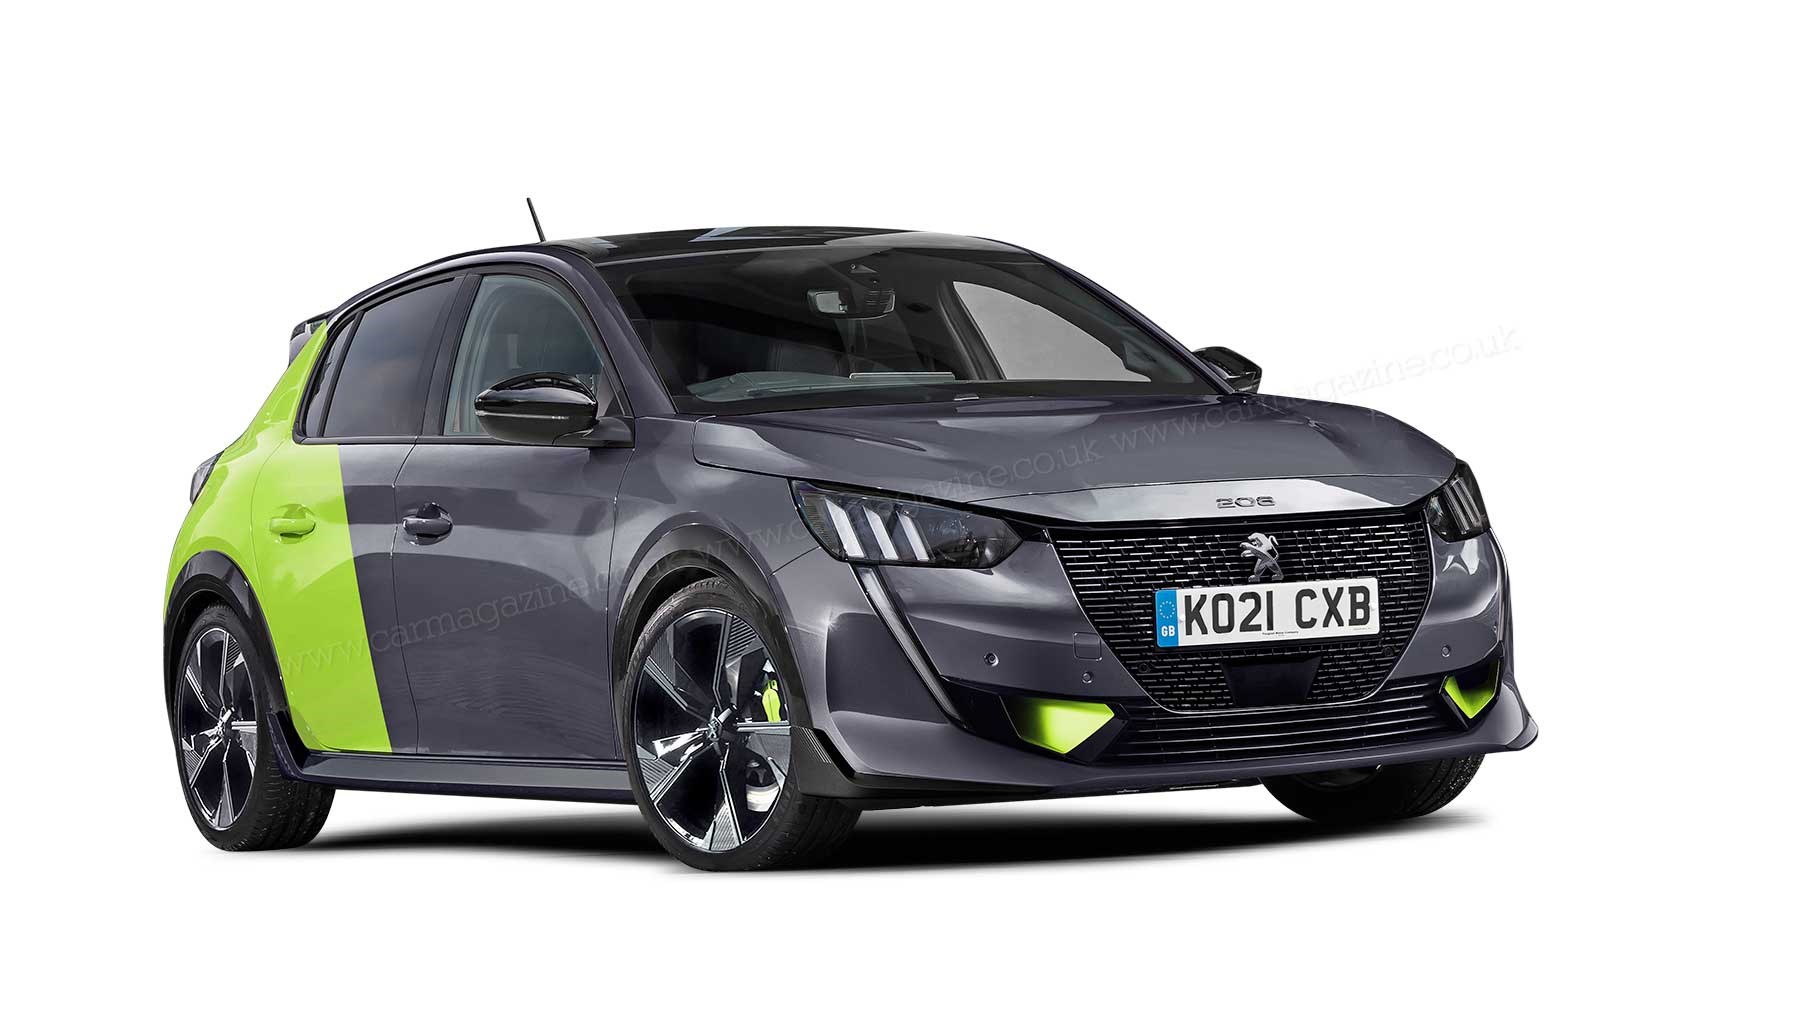 So what's going on with the new Peugeot 208 GTI?